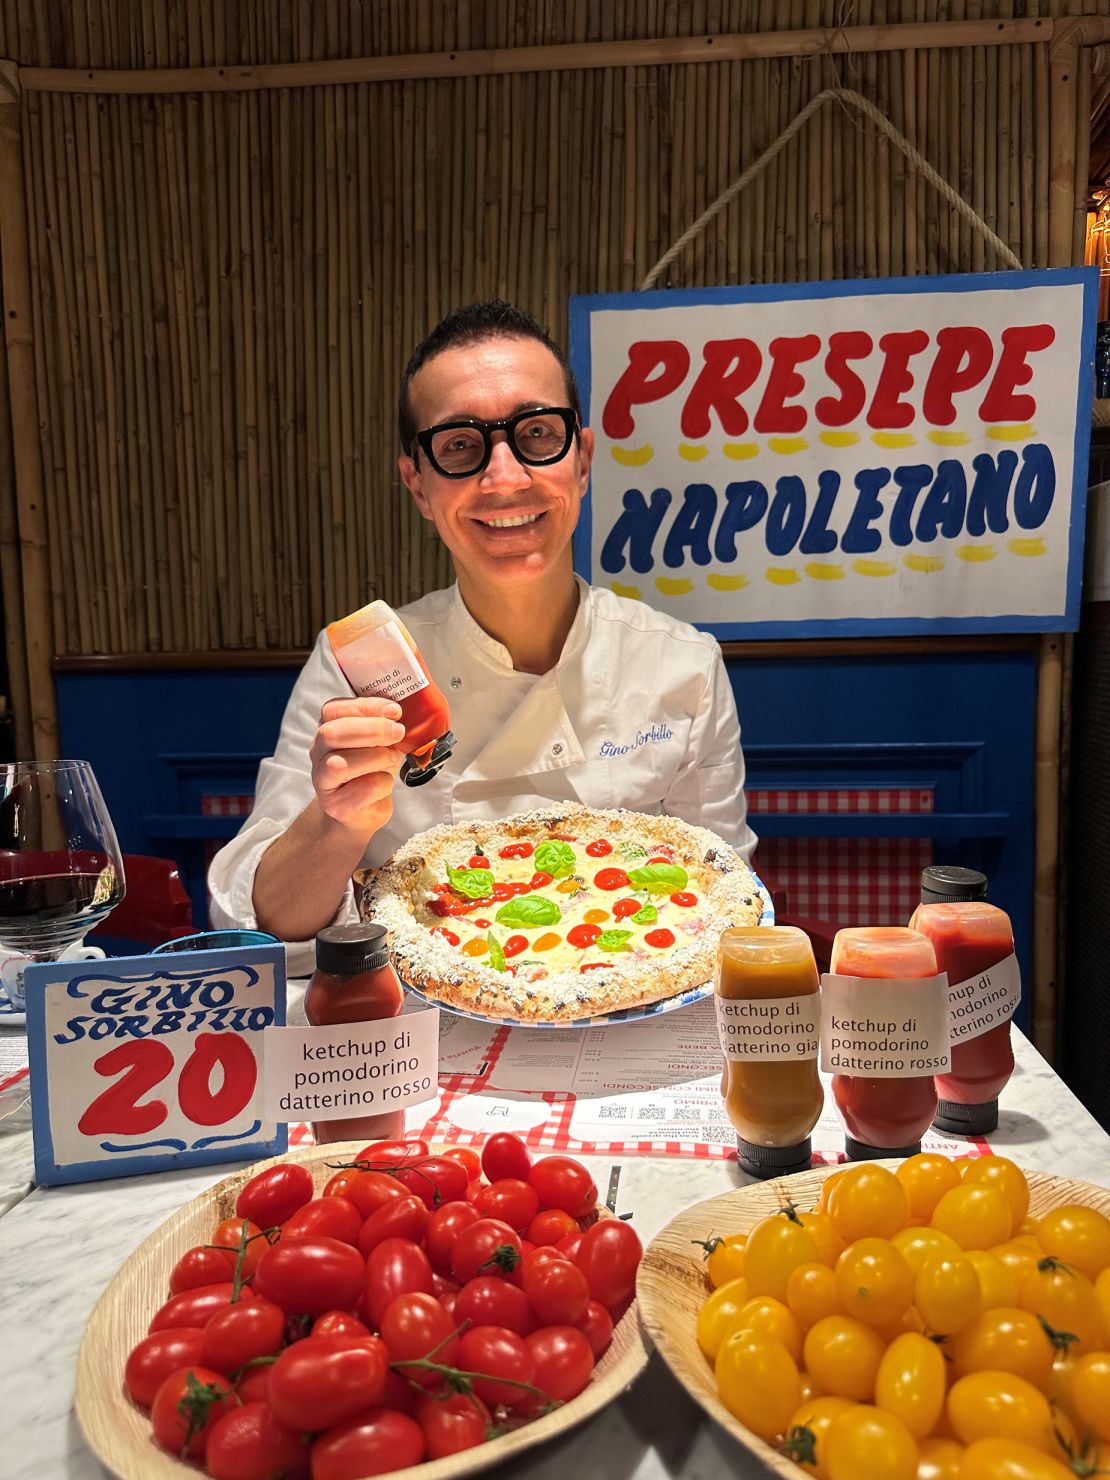 Sorbillo has since created a pizza with ketchup to further incite his critics.